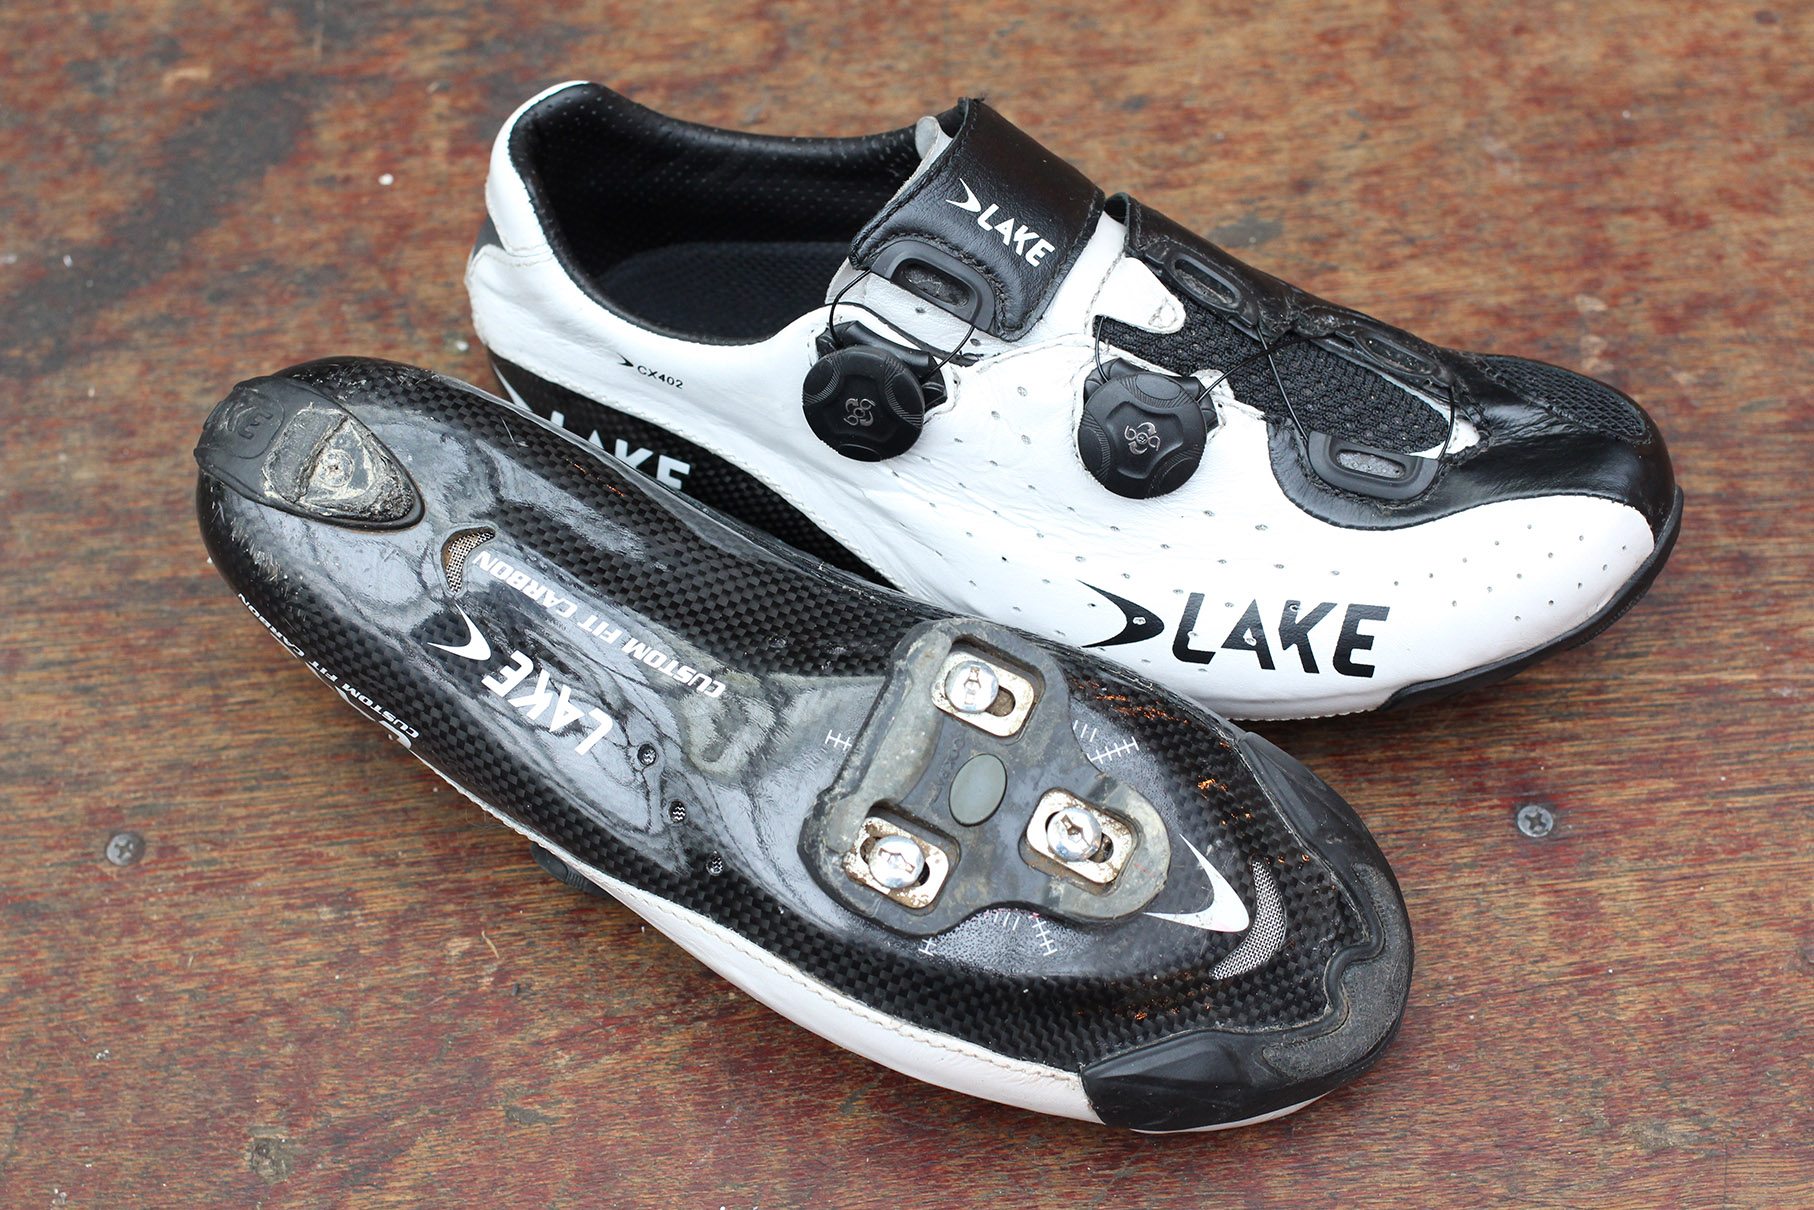 Lake CX 165 Silver Leather Race Cycling Shoes Size 40 